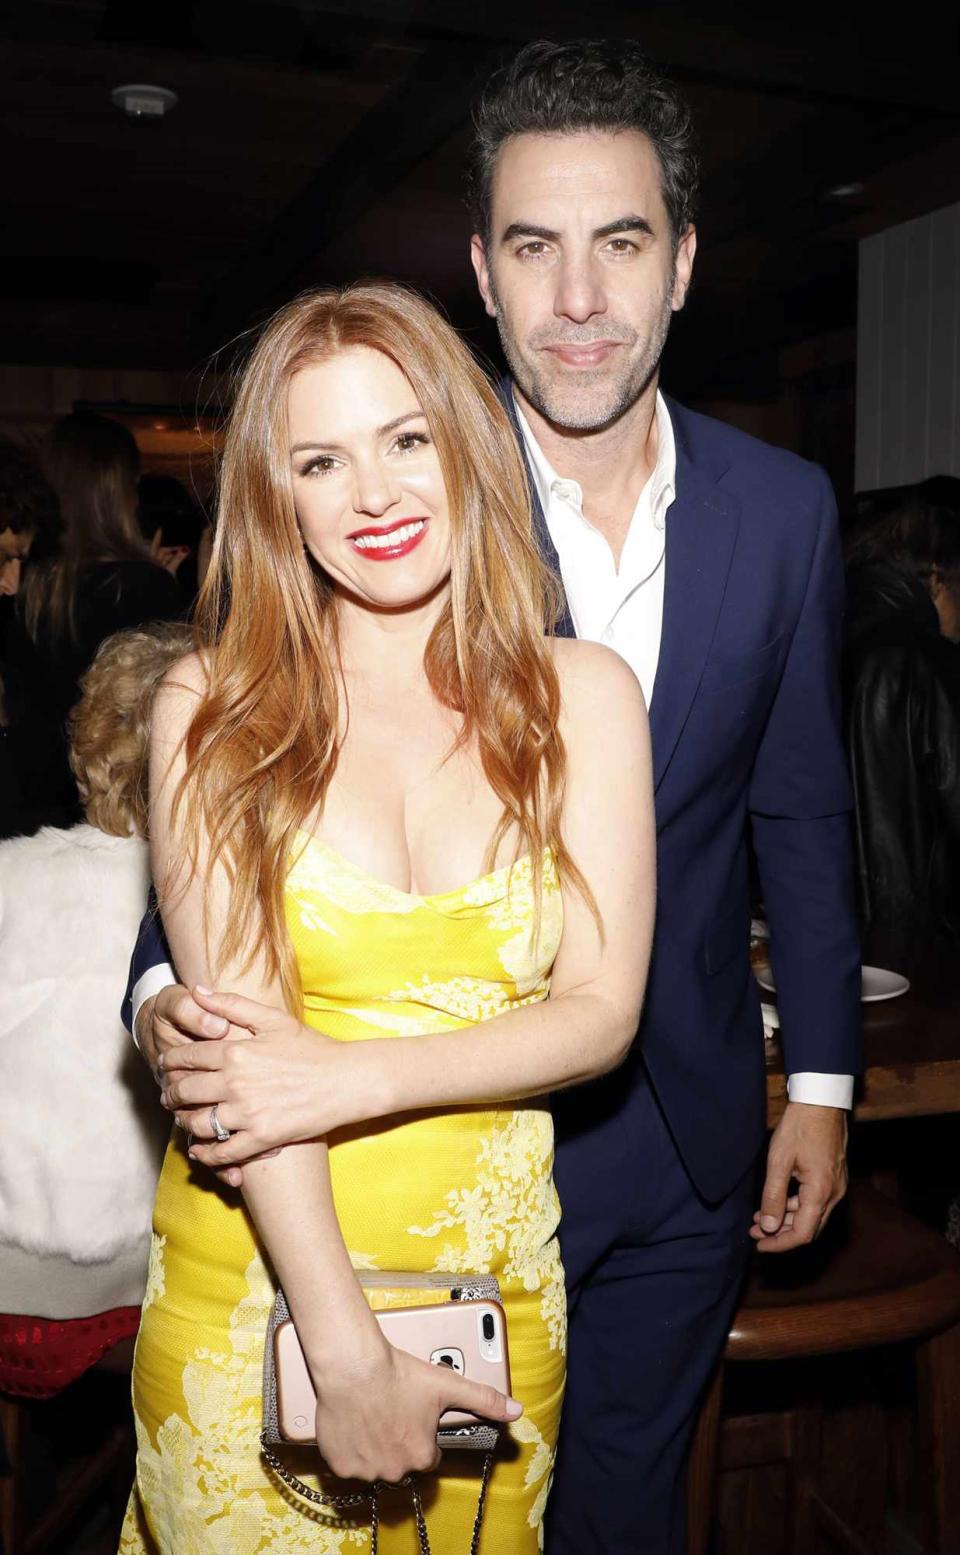 Isla Fisher and Sacha Baron Cohen attend a special screening and reception of "LION" hosted by David O'Russell and Lee Daniels celebrating director Garth Davis at Estrella on January 6, 2017 in West Hollywood, California